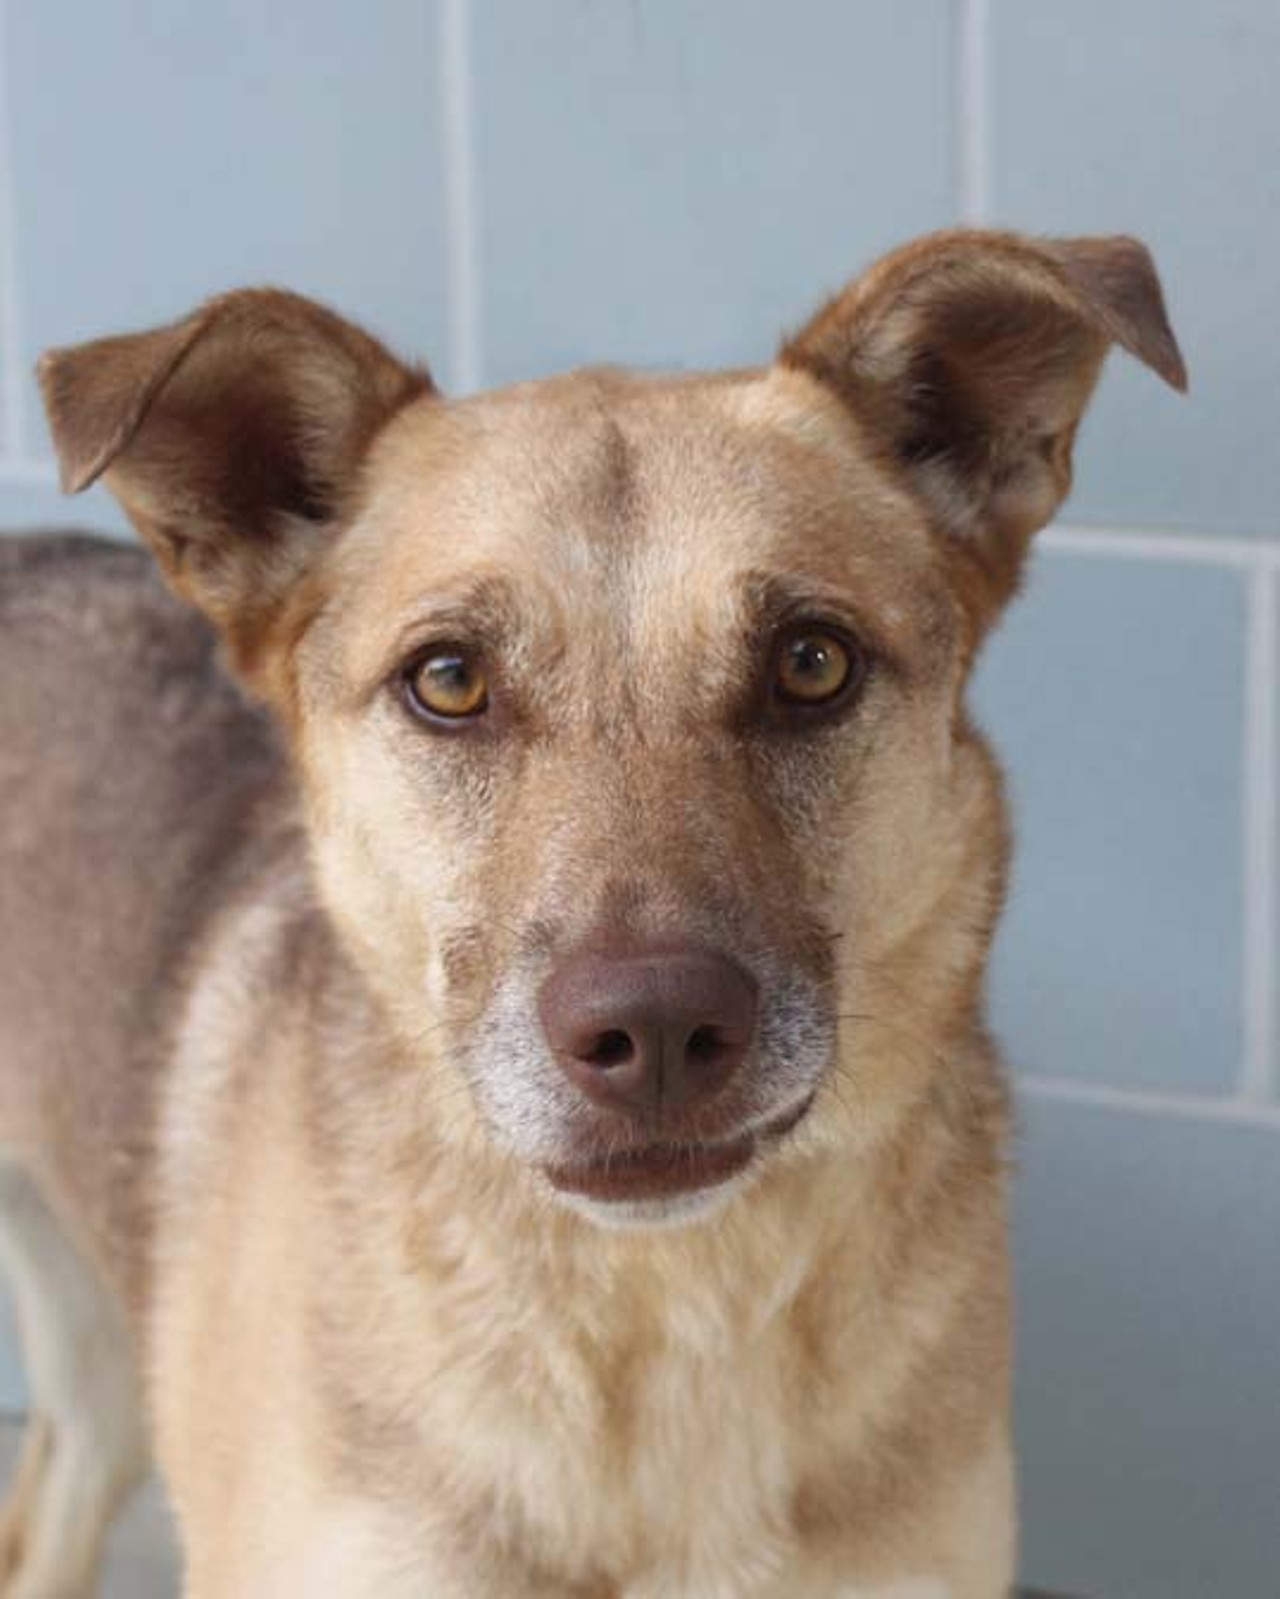 Myah
See that concerned look in my eyes? That&#146;s typical for me. I&#146;m kind of a nursemaid dog &#151; I like to take care of people. I&#146;m sweet, loving and caring. I&#146;m gentle, but I love to play with kids and other dogs. Going for walks is a great pleasure for me. I&#146;ve had a good home and know the ins and outs of behaving well, but now my family has to move and they can&#146;t take me with them, so they brought me here so I can find a new family to take care of.